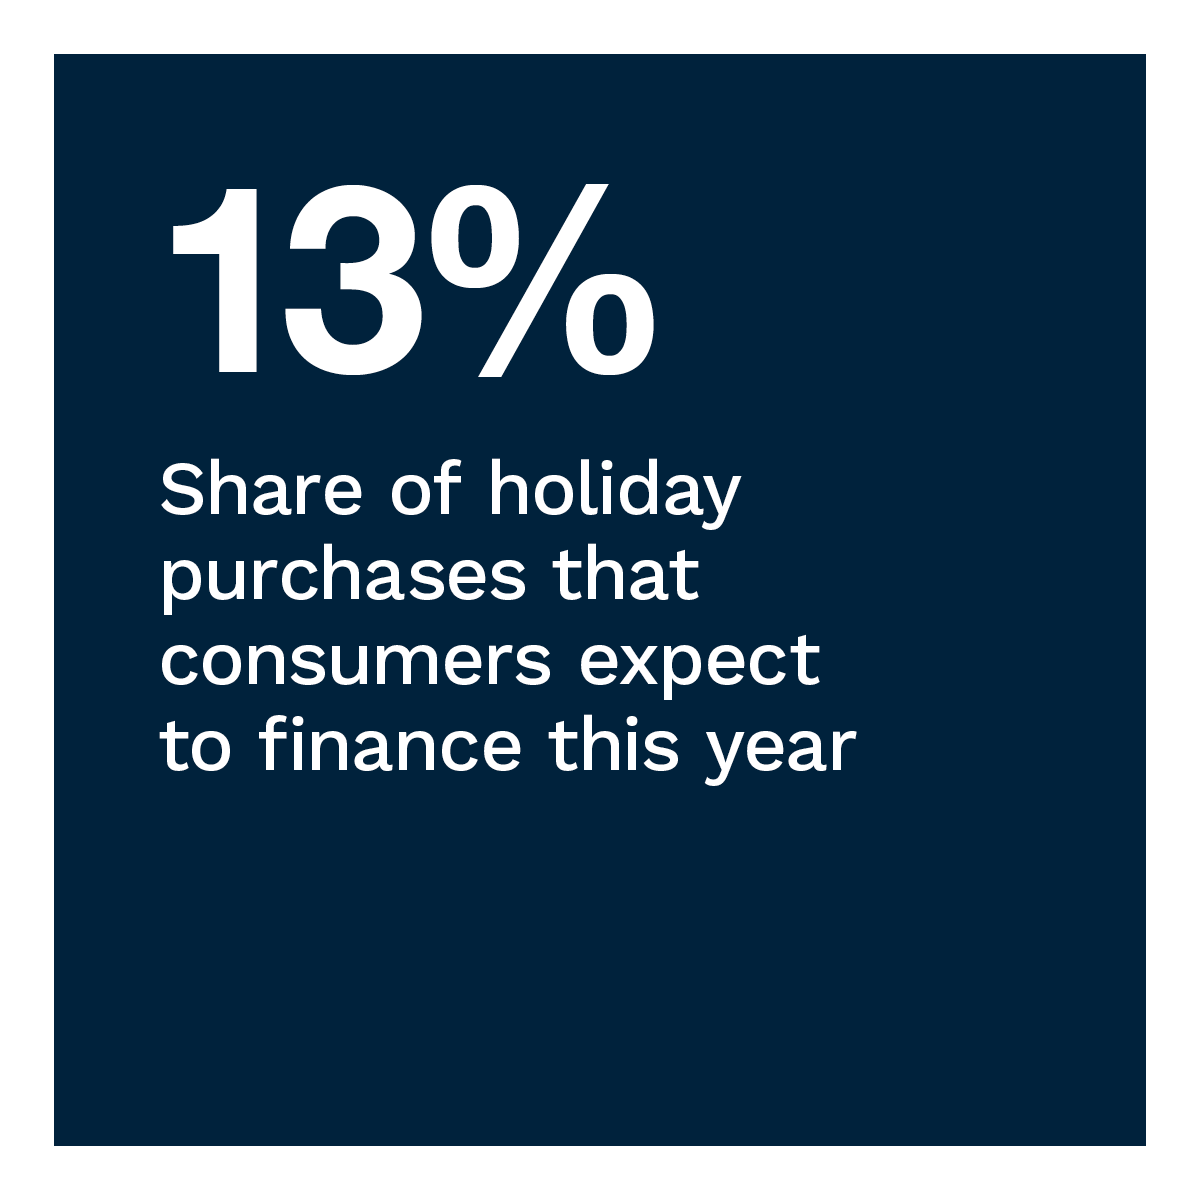 13%: Share of holiday purchases that consumers expect to finance this year